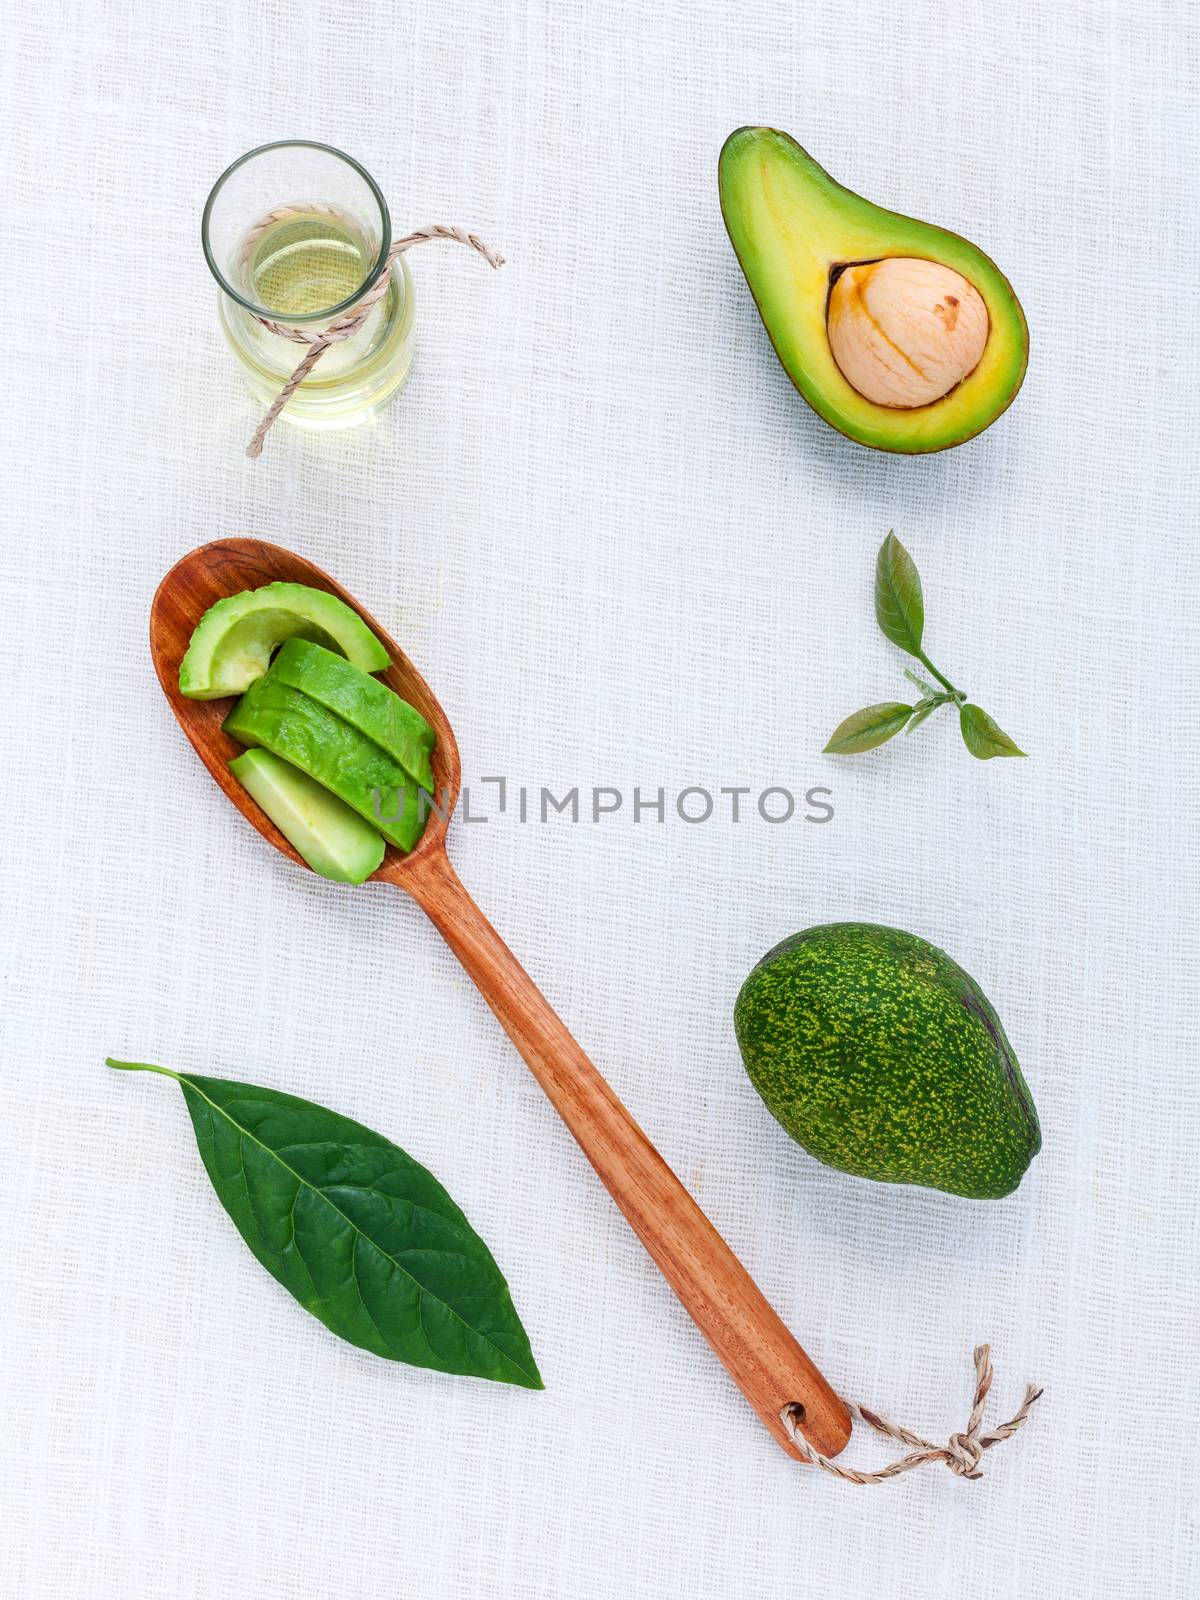 Avocado oil on the white table background clean and healthy conc by kerdkanno